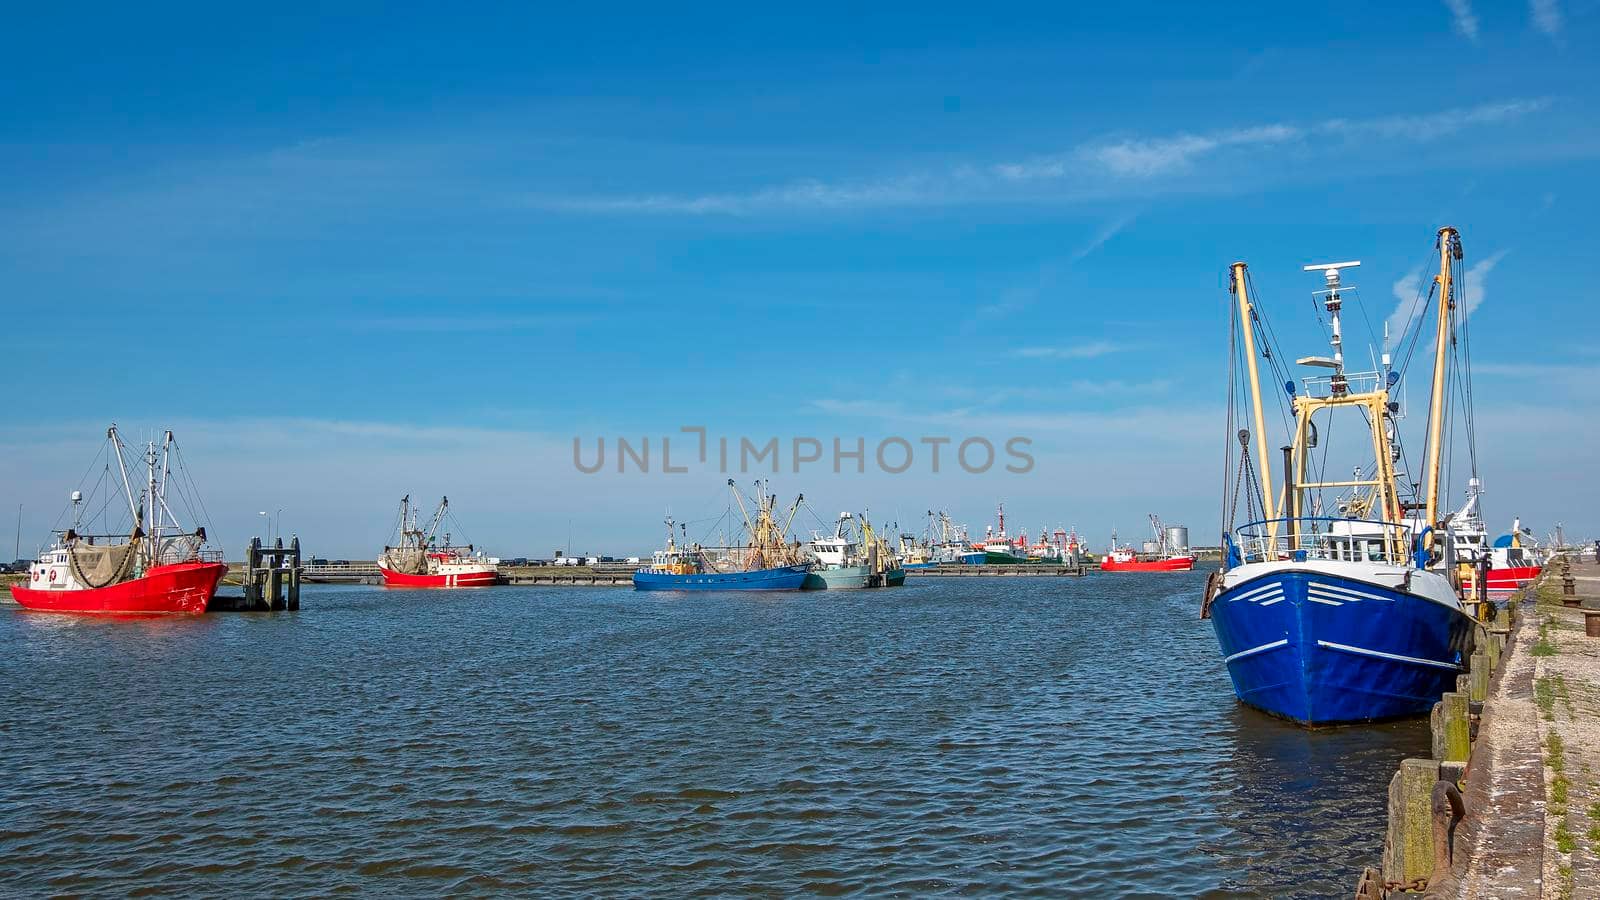 The fishing harbor in Lauwersoog Friesland the Netherlands by devy